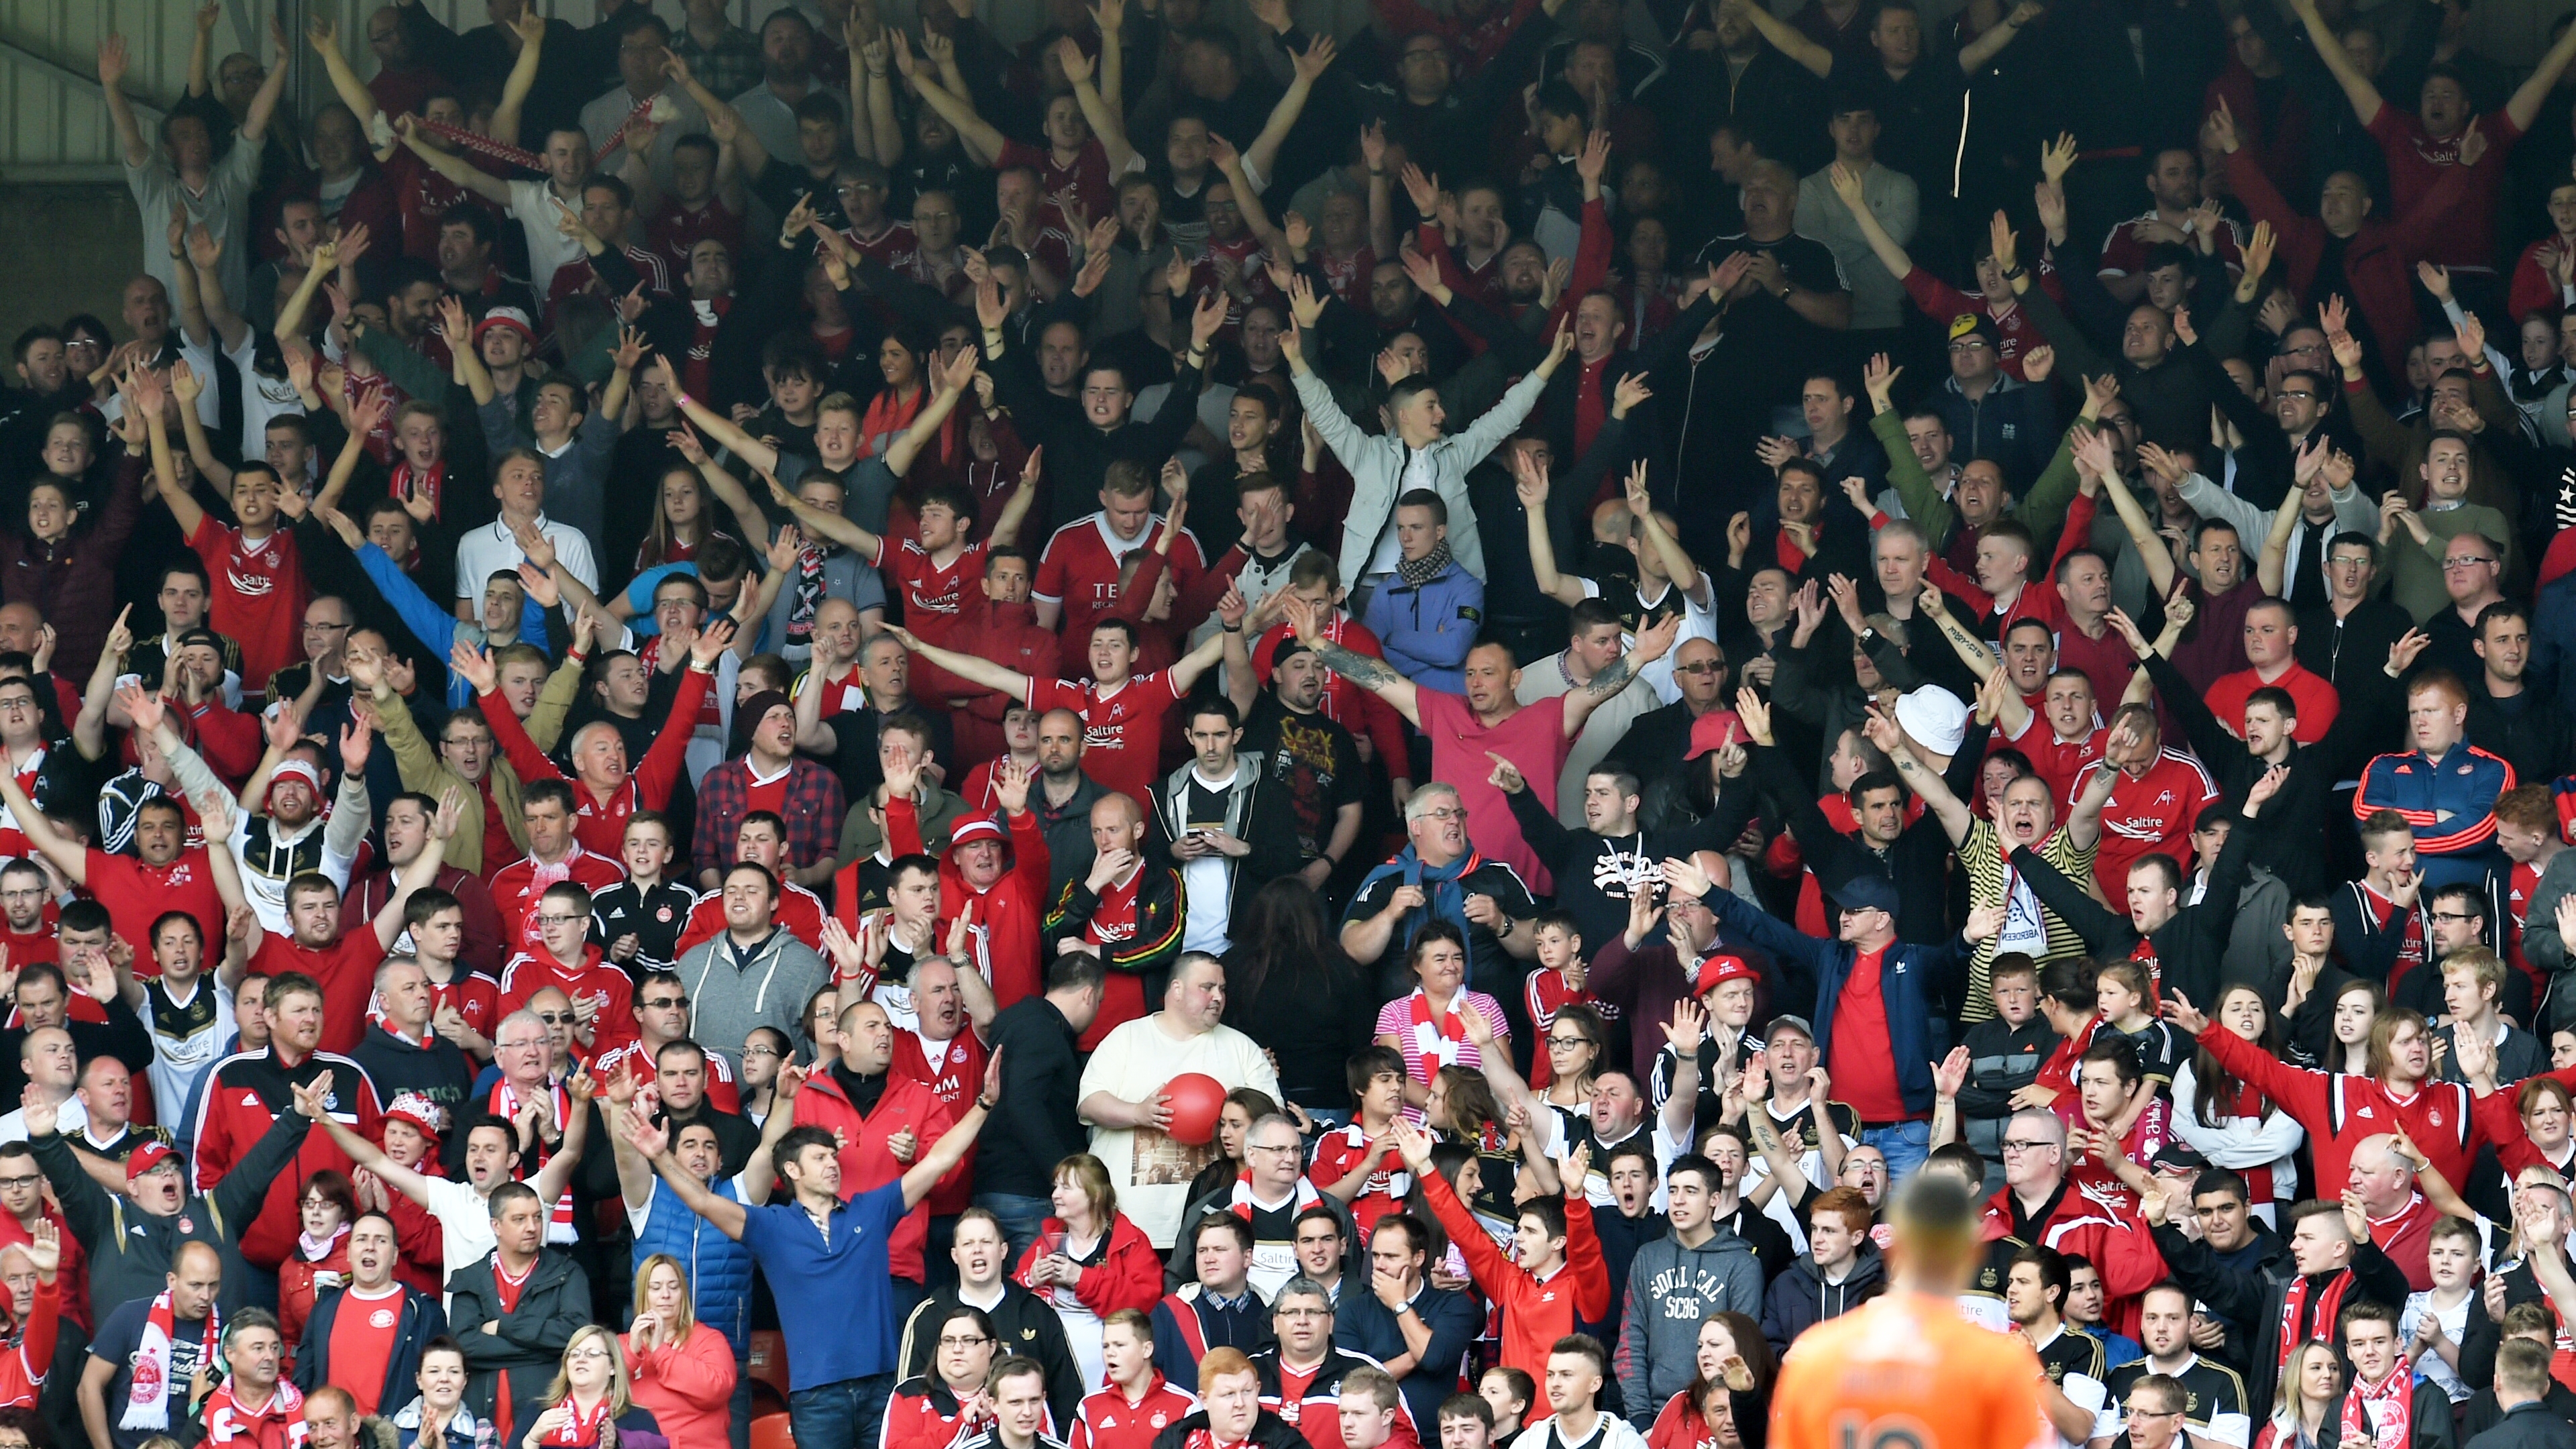 The Aberdeen supporters were in fine voice, particularly after Kenny McLean's goal